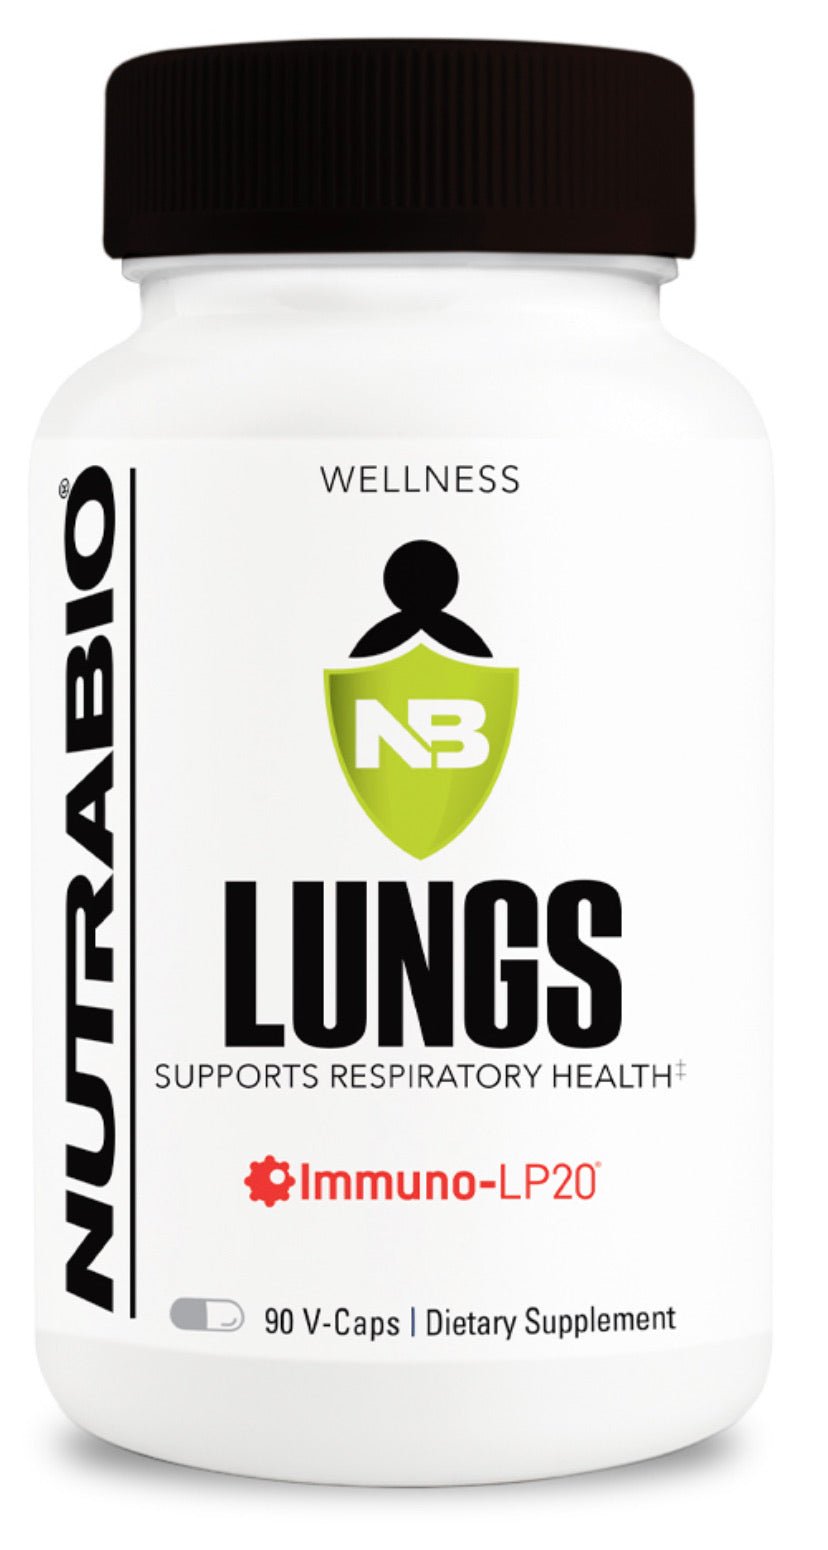 Nutrabio lungs